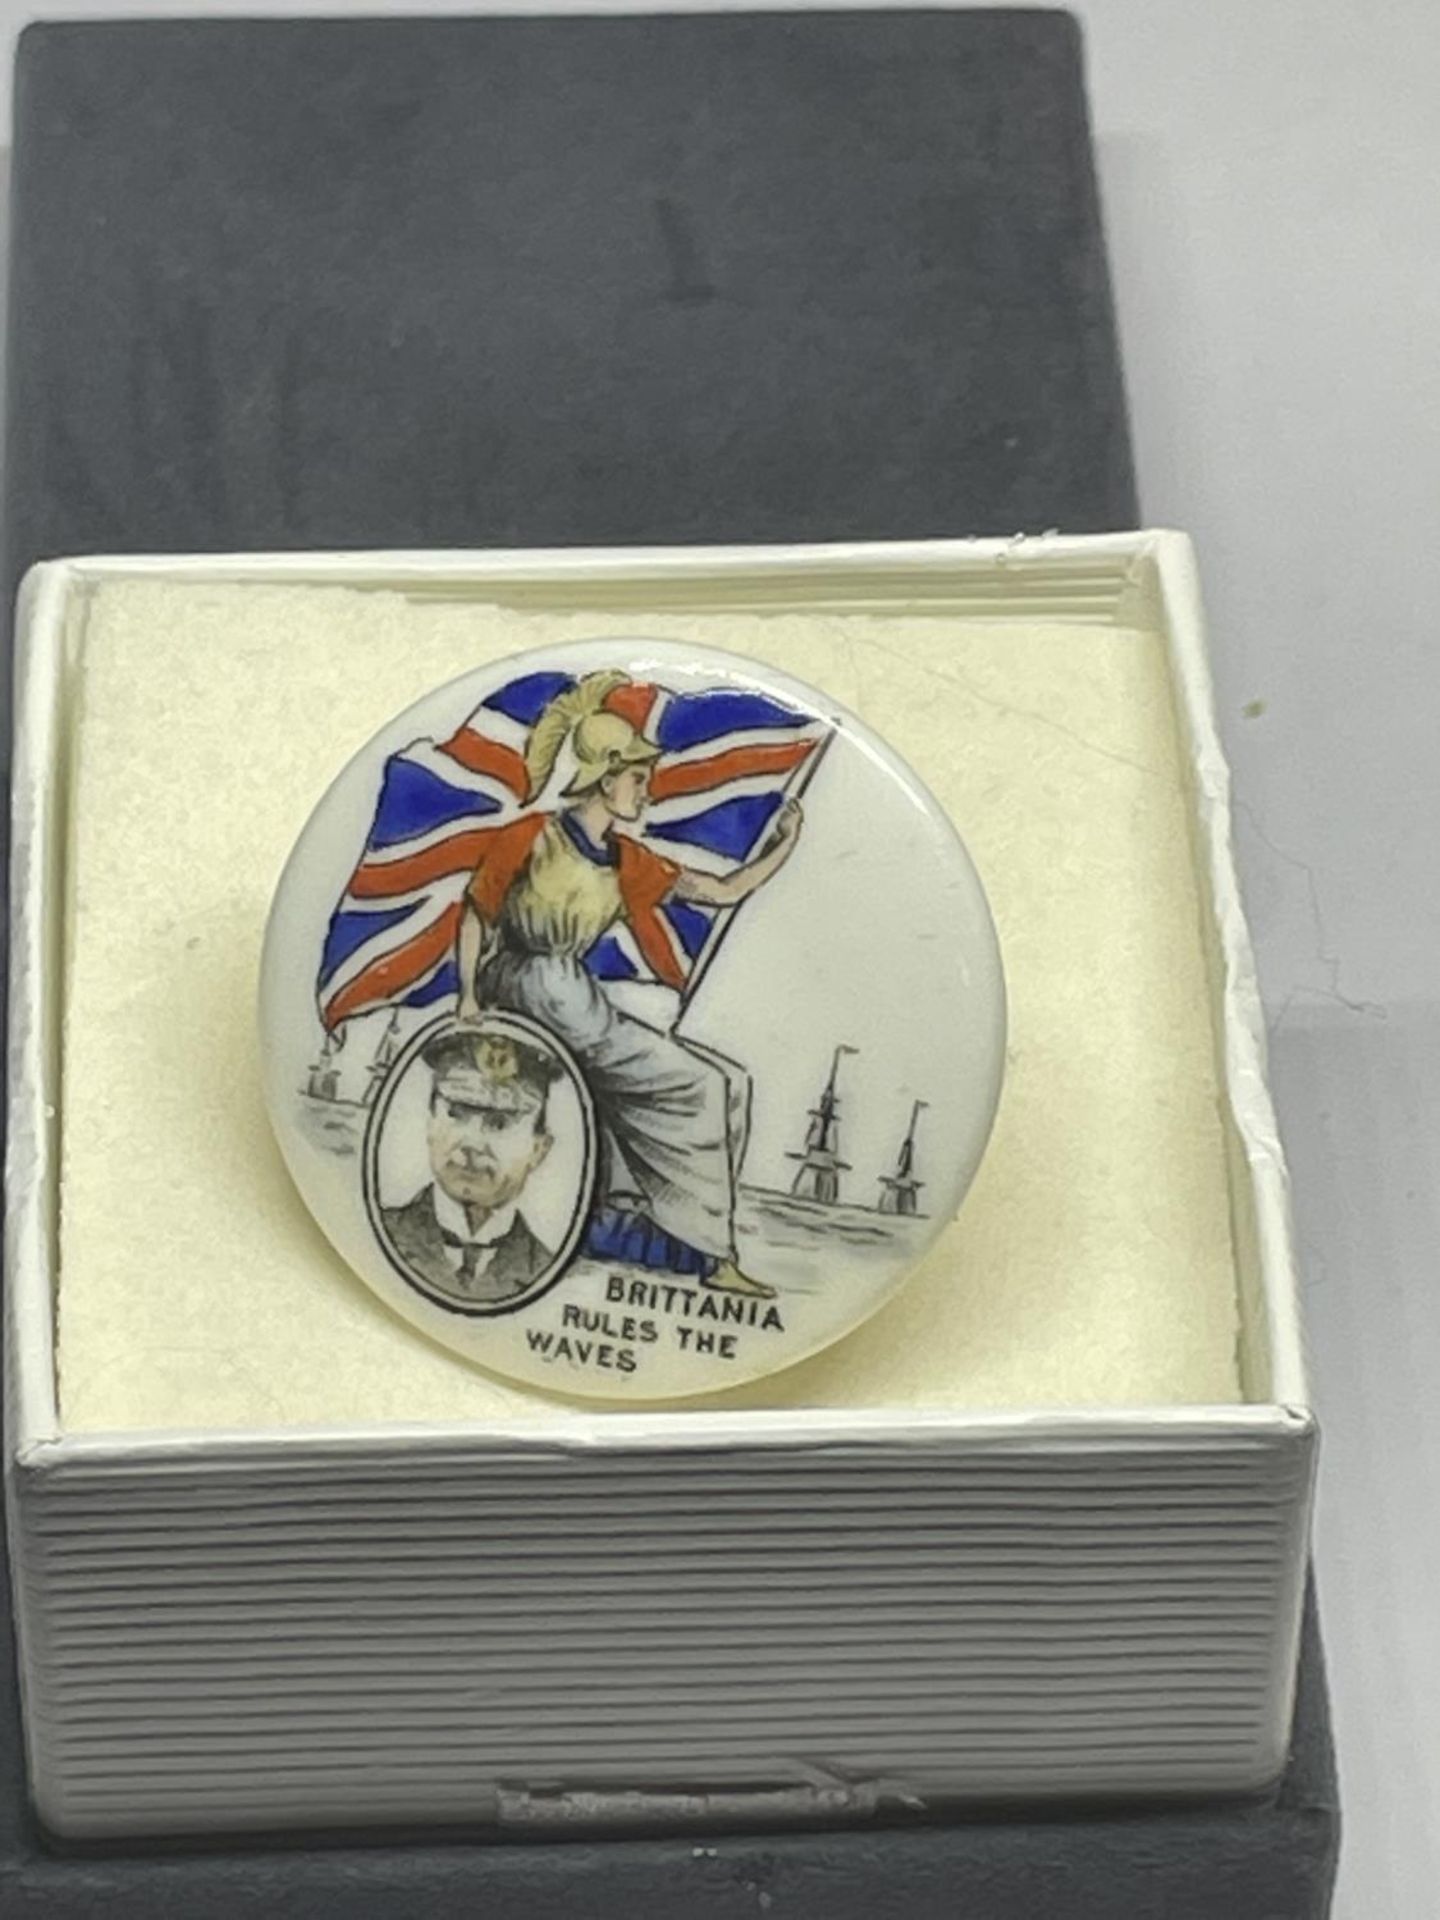 A VICTORIAN CERAMIC NAVAL LAPEL BADGE IN A PRESENTATION BOX - Image 3 of 3